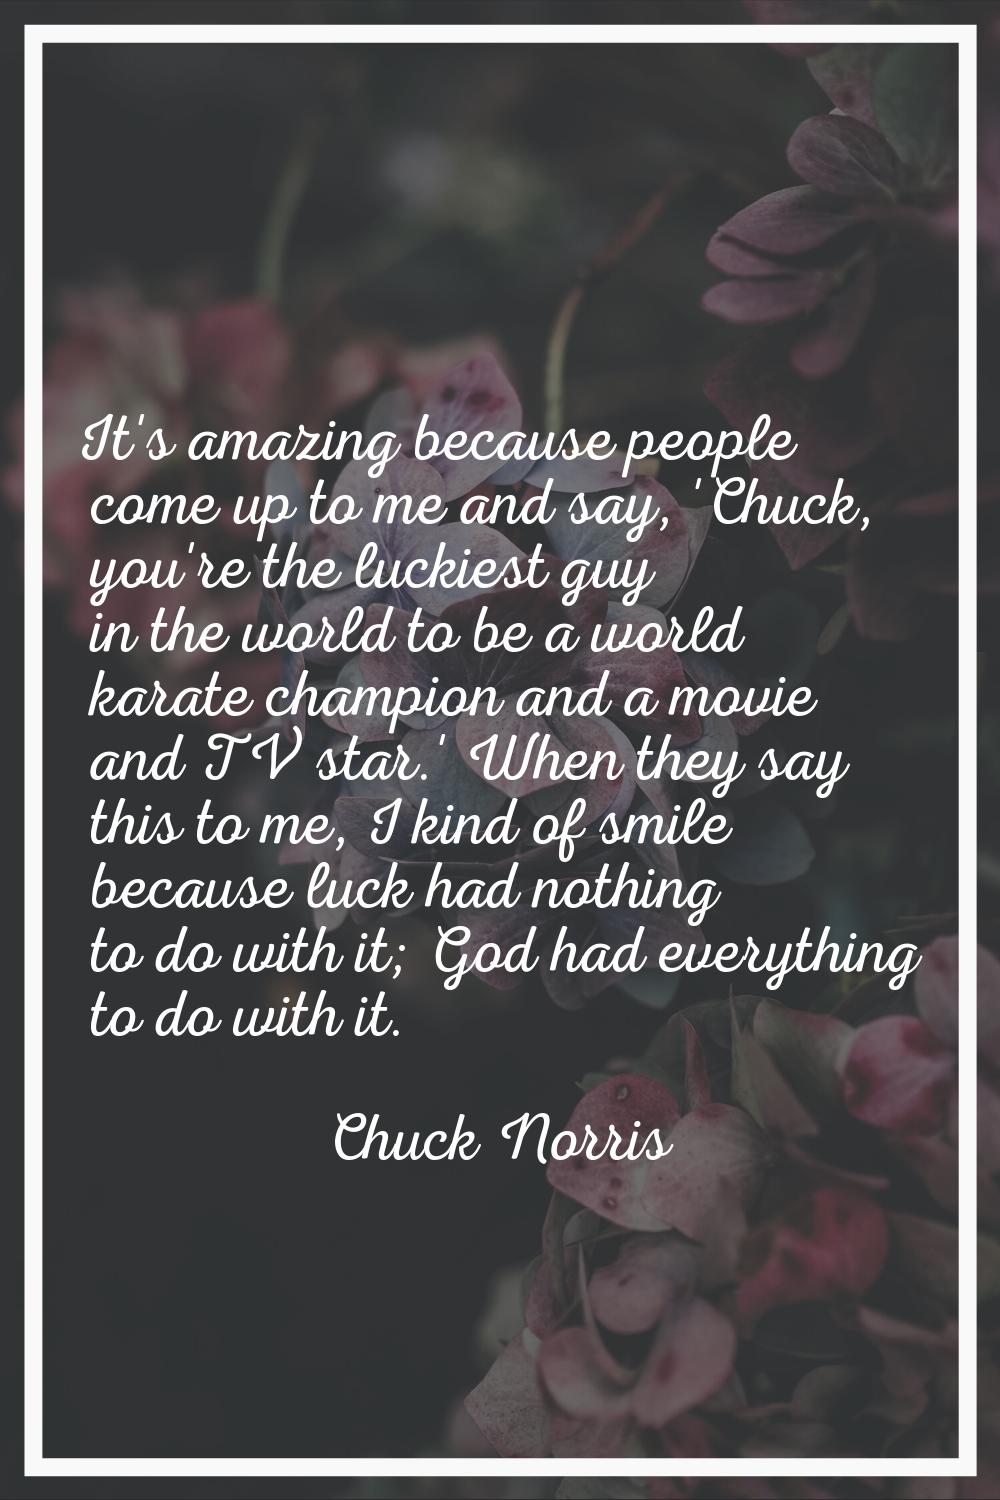 It's amazing because people come up to me and say, 'Chuck, you're the luckiest guy in the world to 